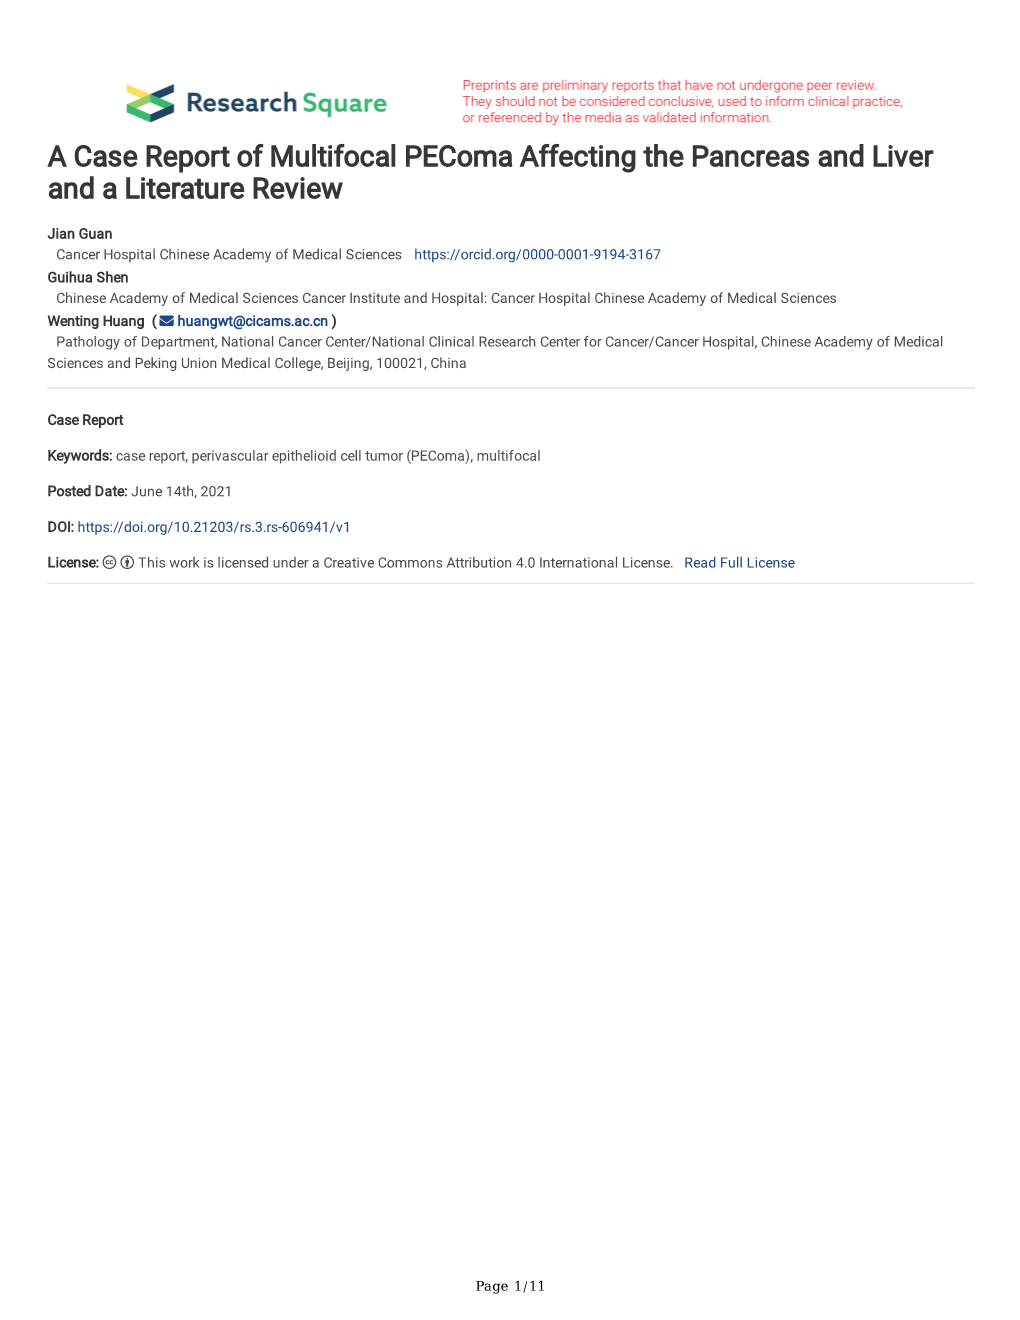 A Case Report of Multifocal Pecoma Affecting the Pancreas and Liver and a Literature Review